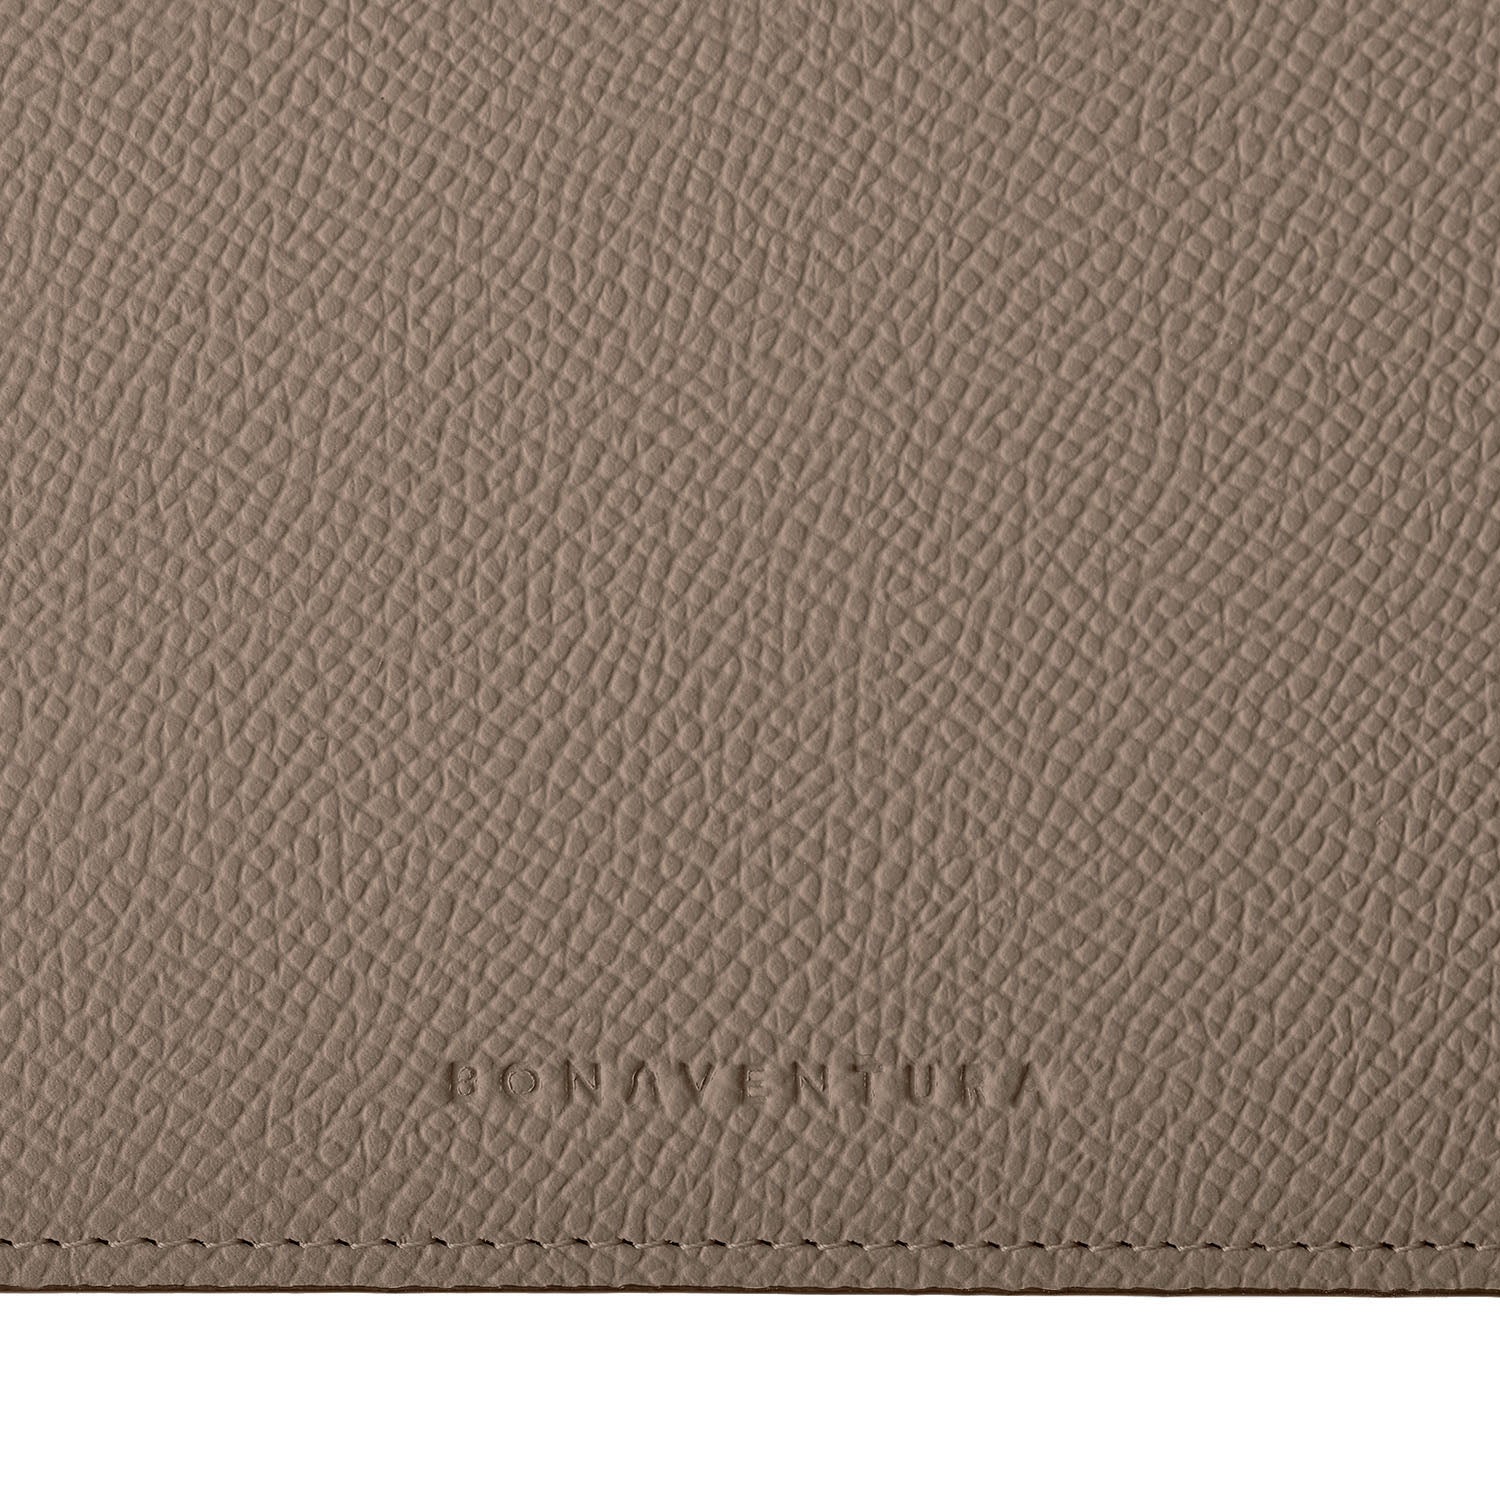 MacBook Pro Case (13.3 inch) Noblesse Leather